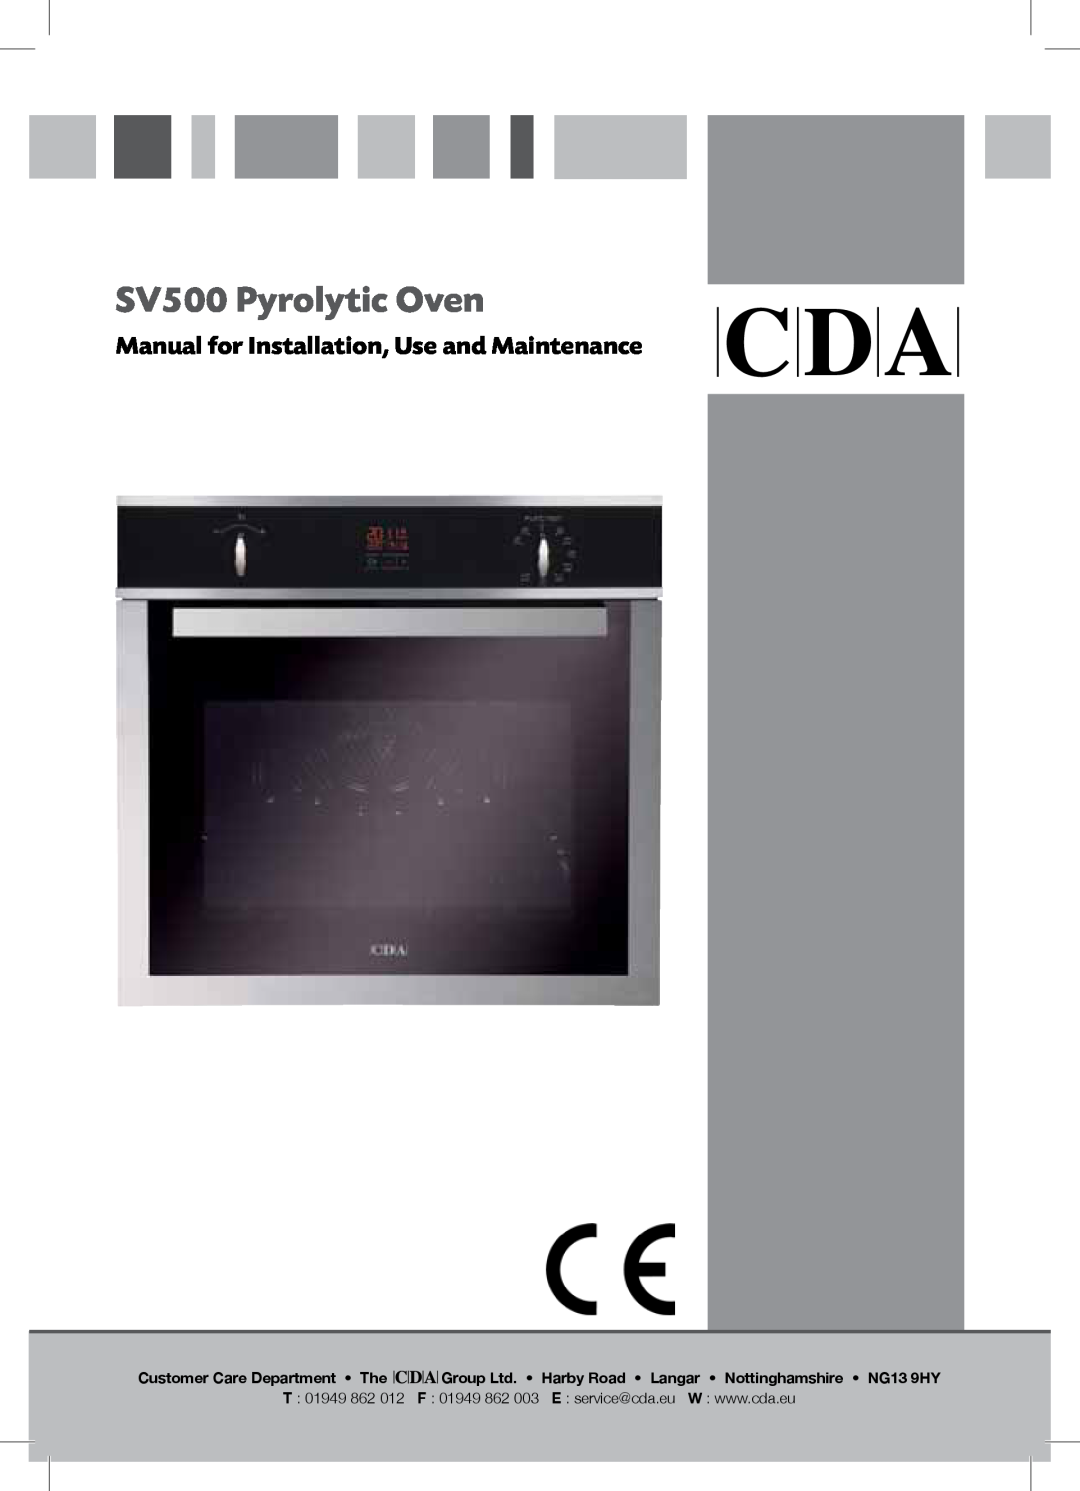 CDA manual SV500 Pyrolytic Oven, Manual for Installation, Use and Maintenance 